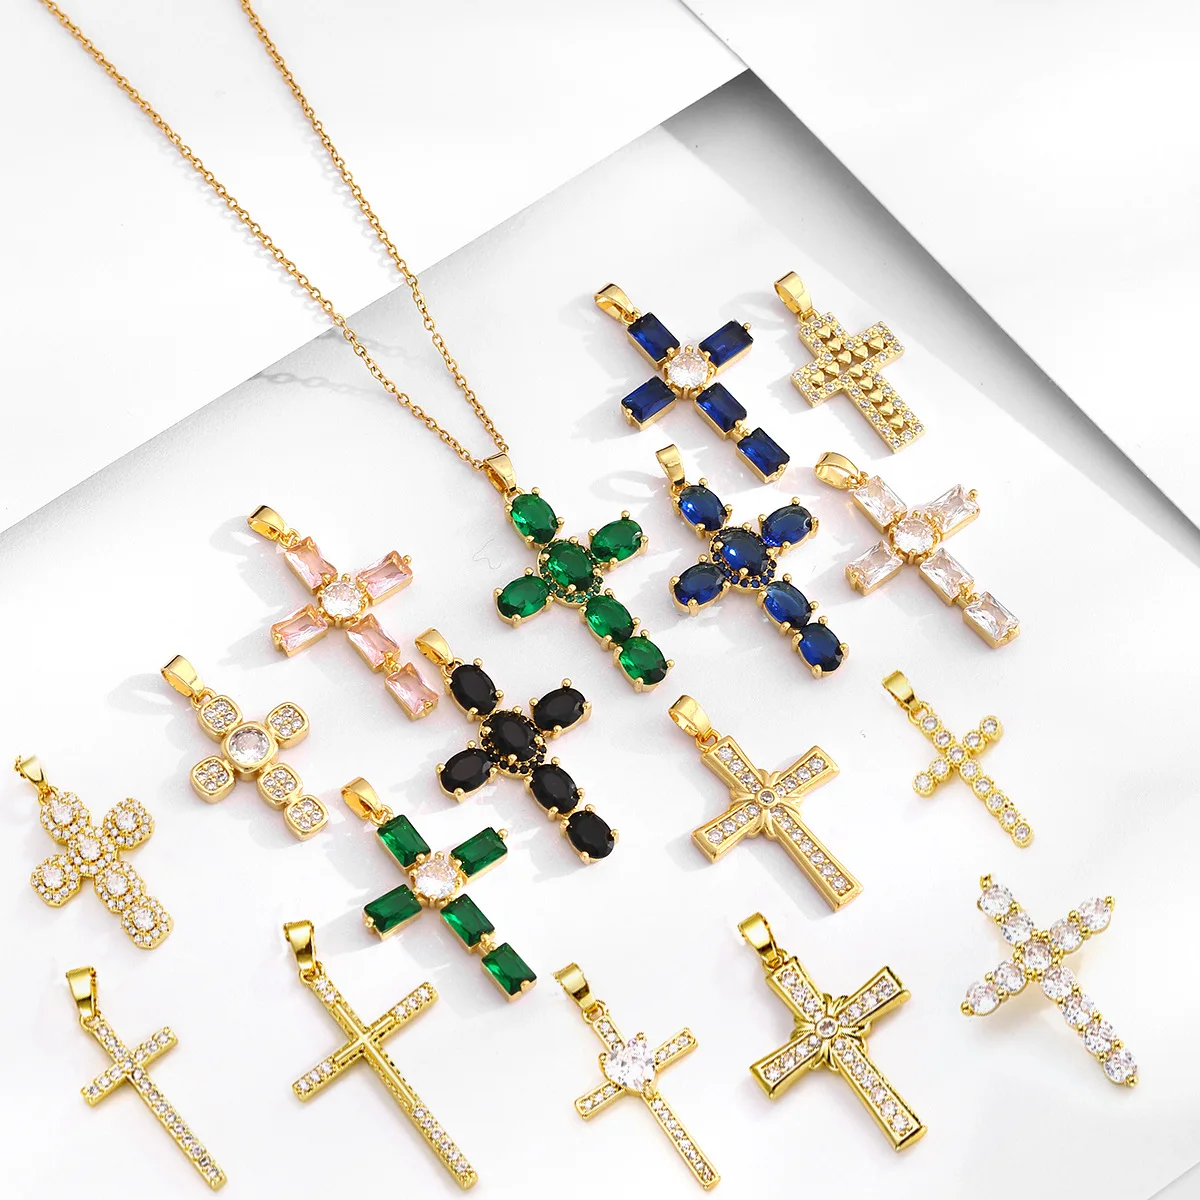 

ZD Cross Necklace 18K/14K Gold Plated Jewelry Stainless Steel Christian Crucifix Cubic Zircon Necklace Cross